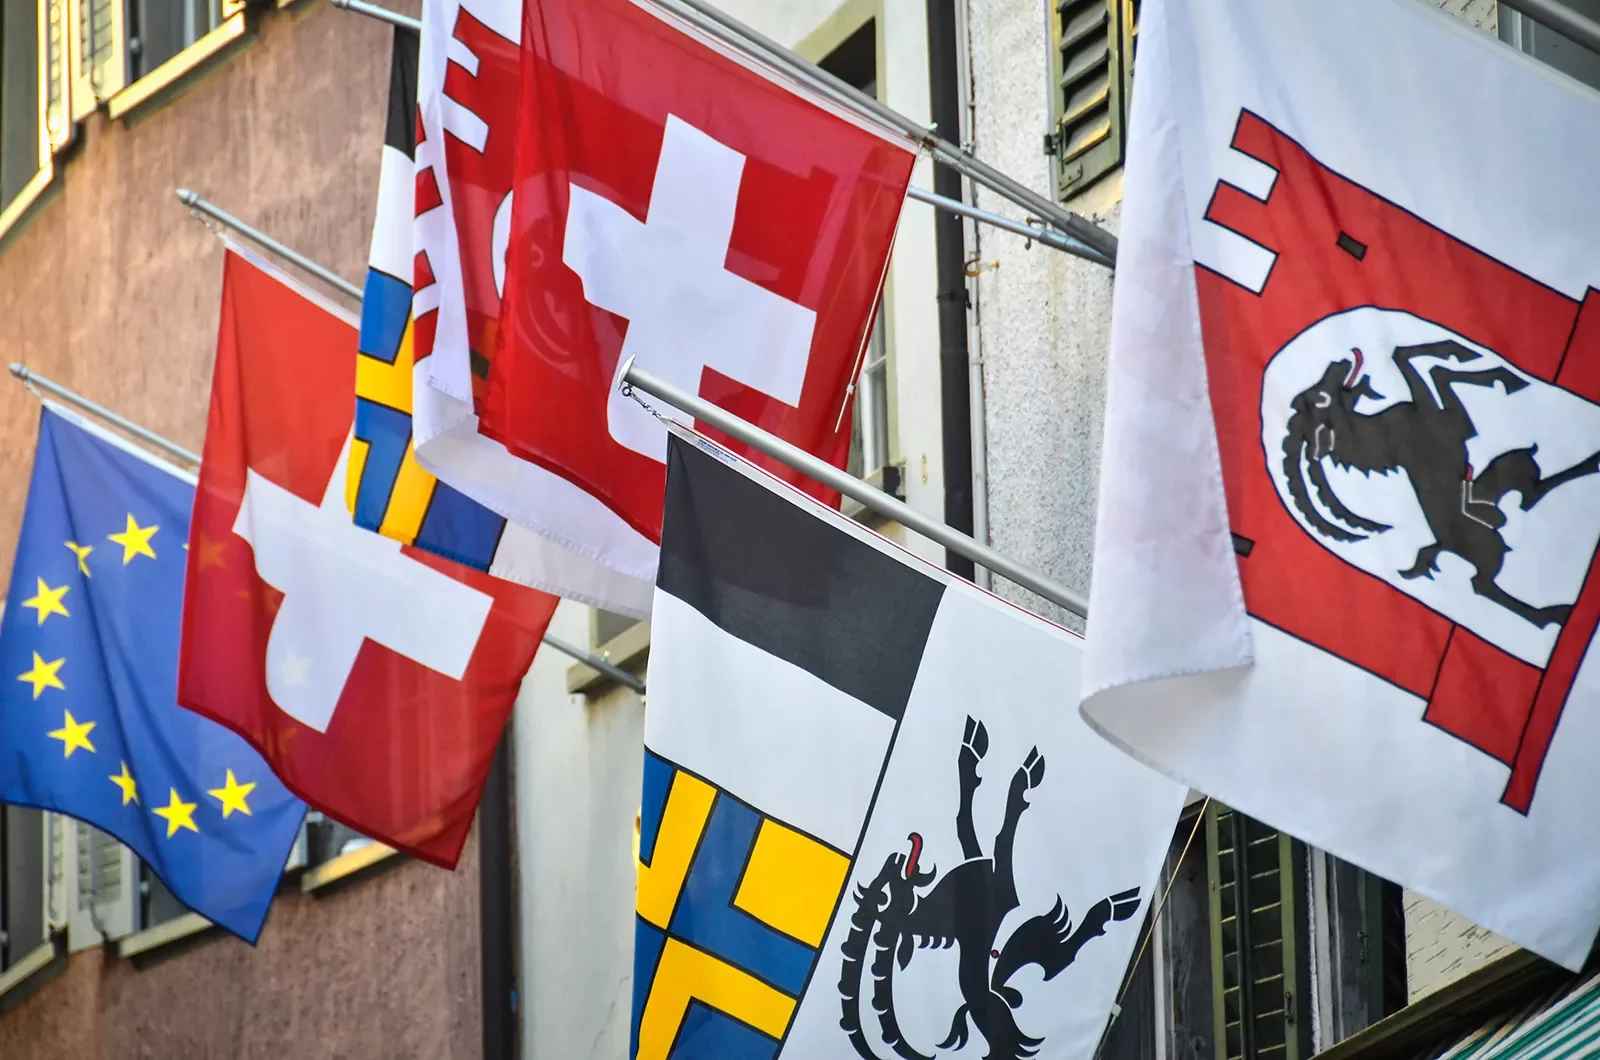 Swiss flags hanging on side of hotel.